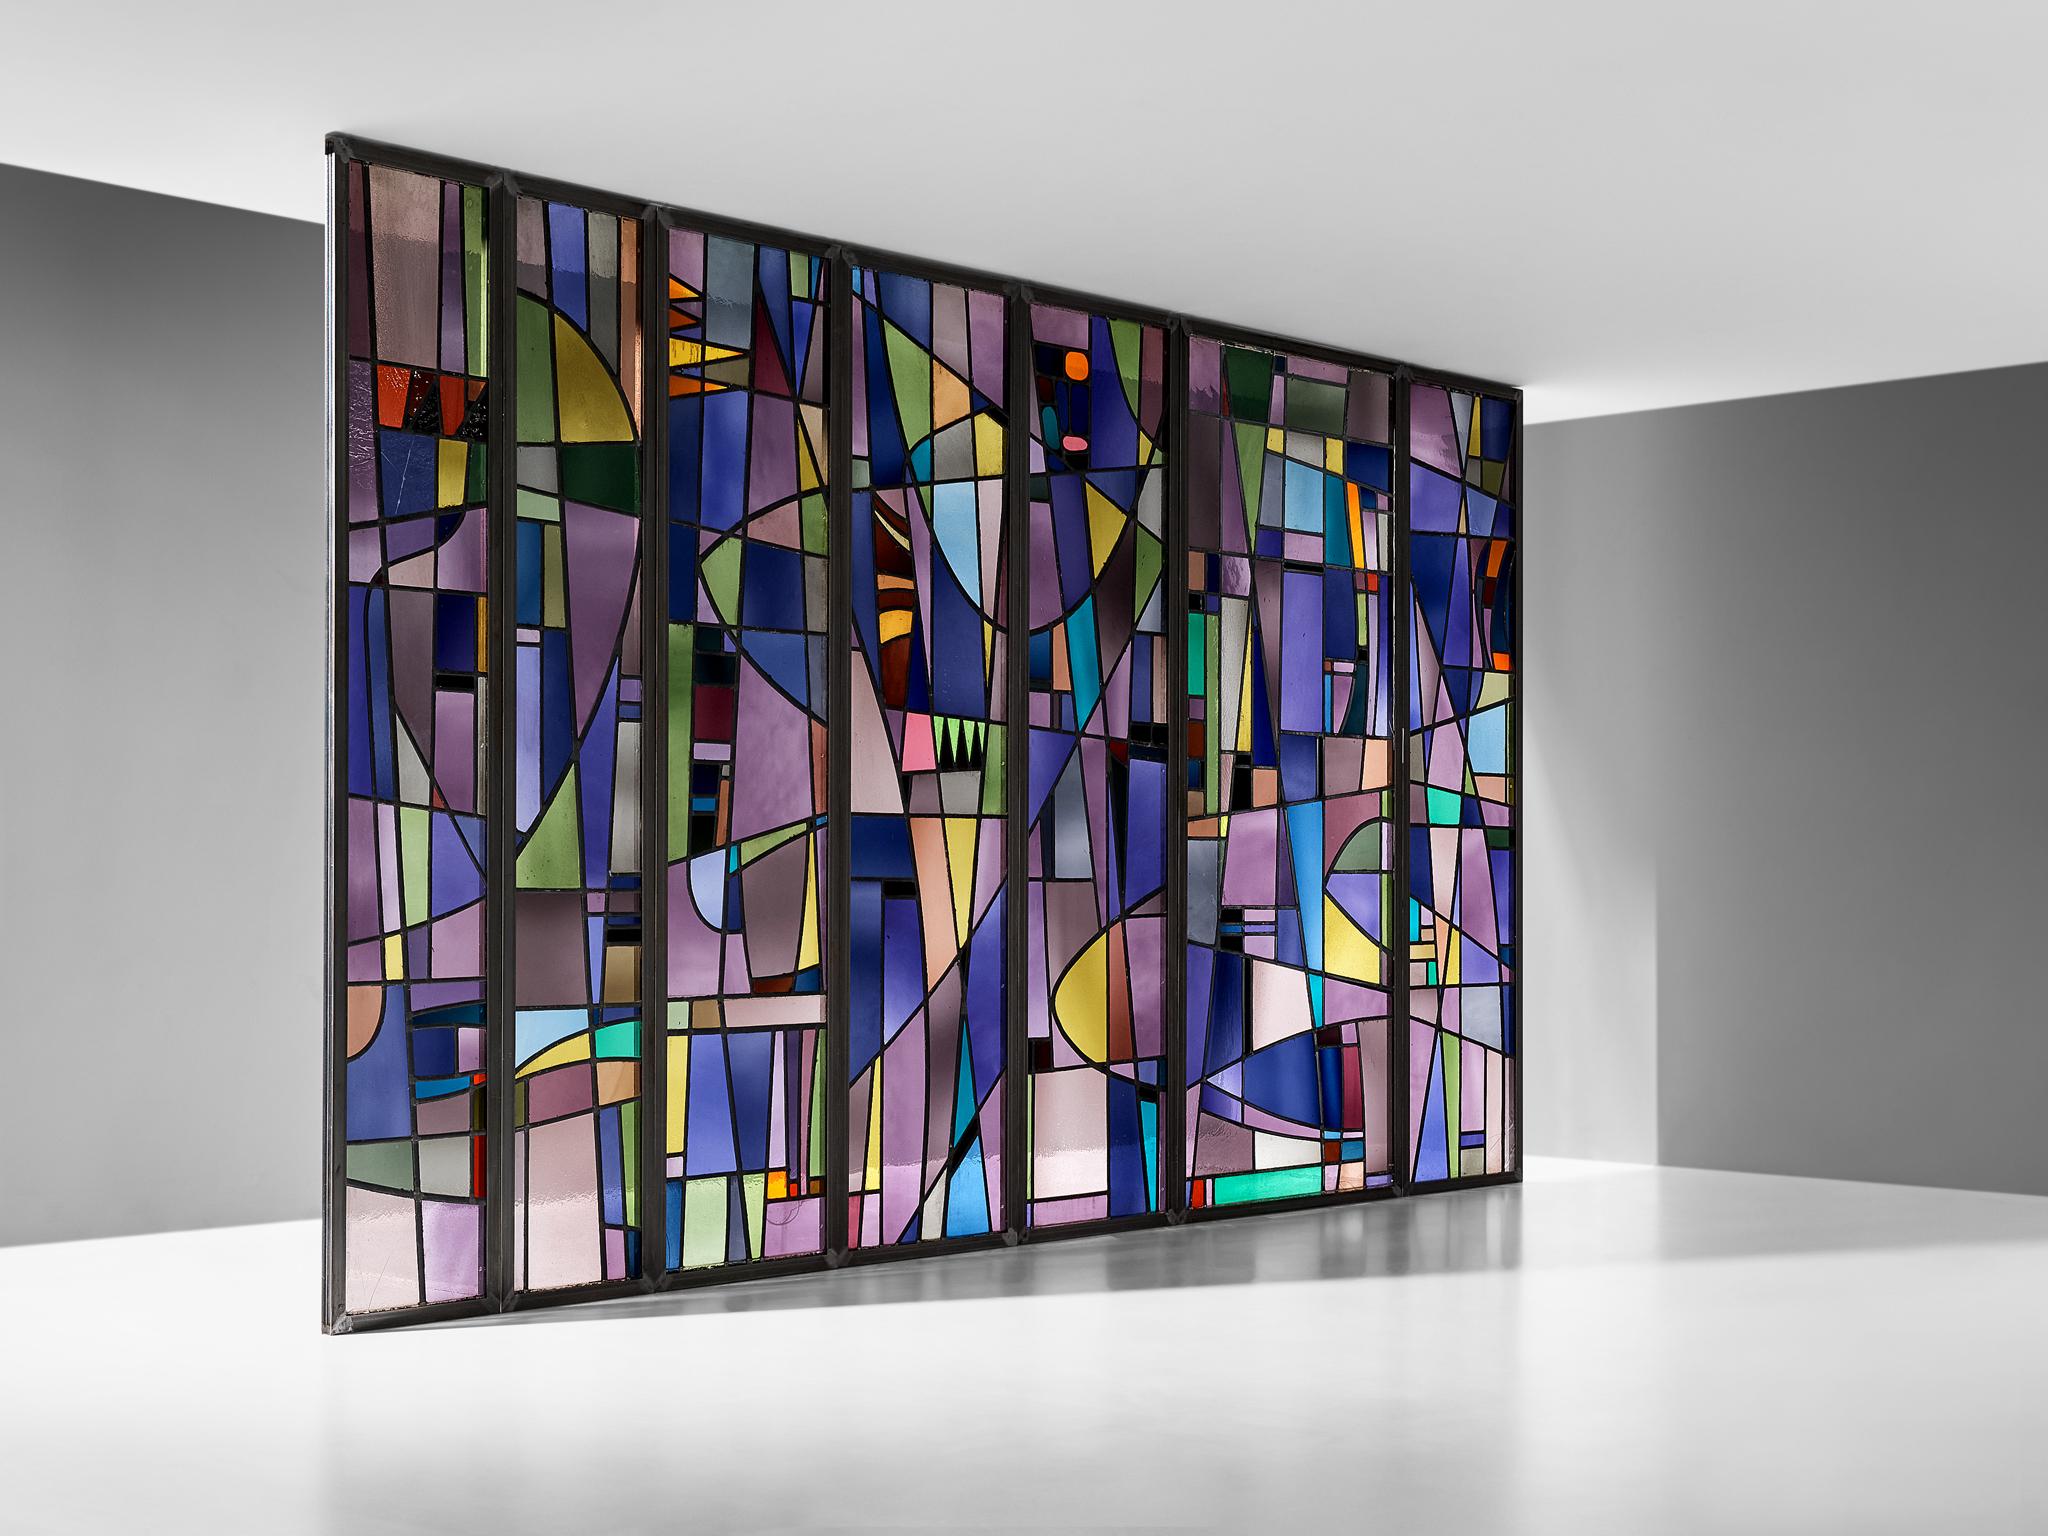 Rogier Vandeweghe, stained glass panels, room divider, Belgium, 1955-1956

Distinctive stained glass panels by Belgian artist Rogier Vandeweghe commissioned by an abbey located in Brugge and were intended for the school. This piece is very